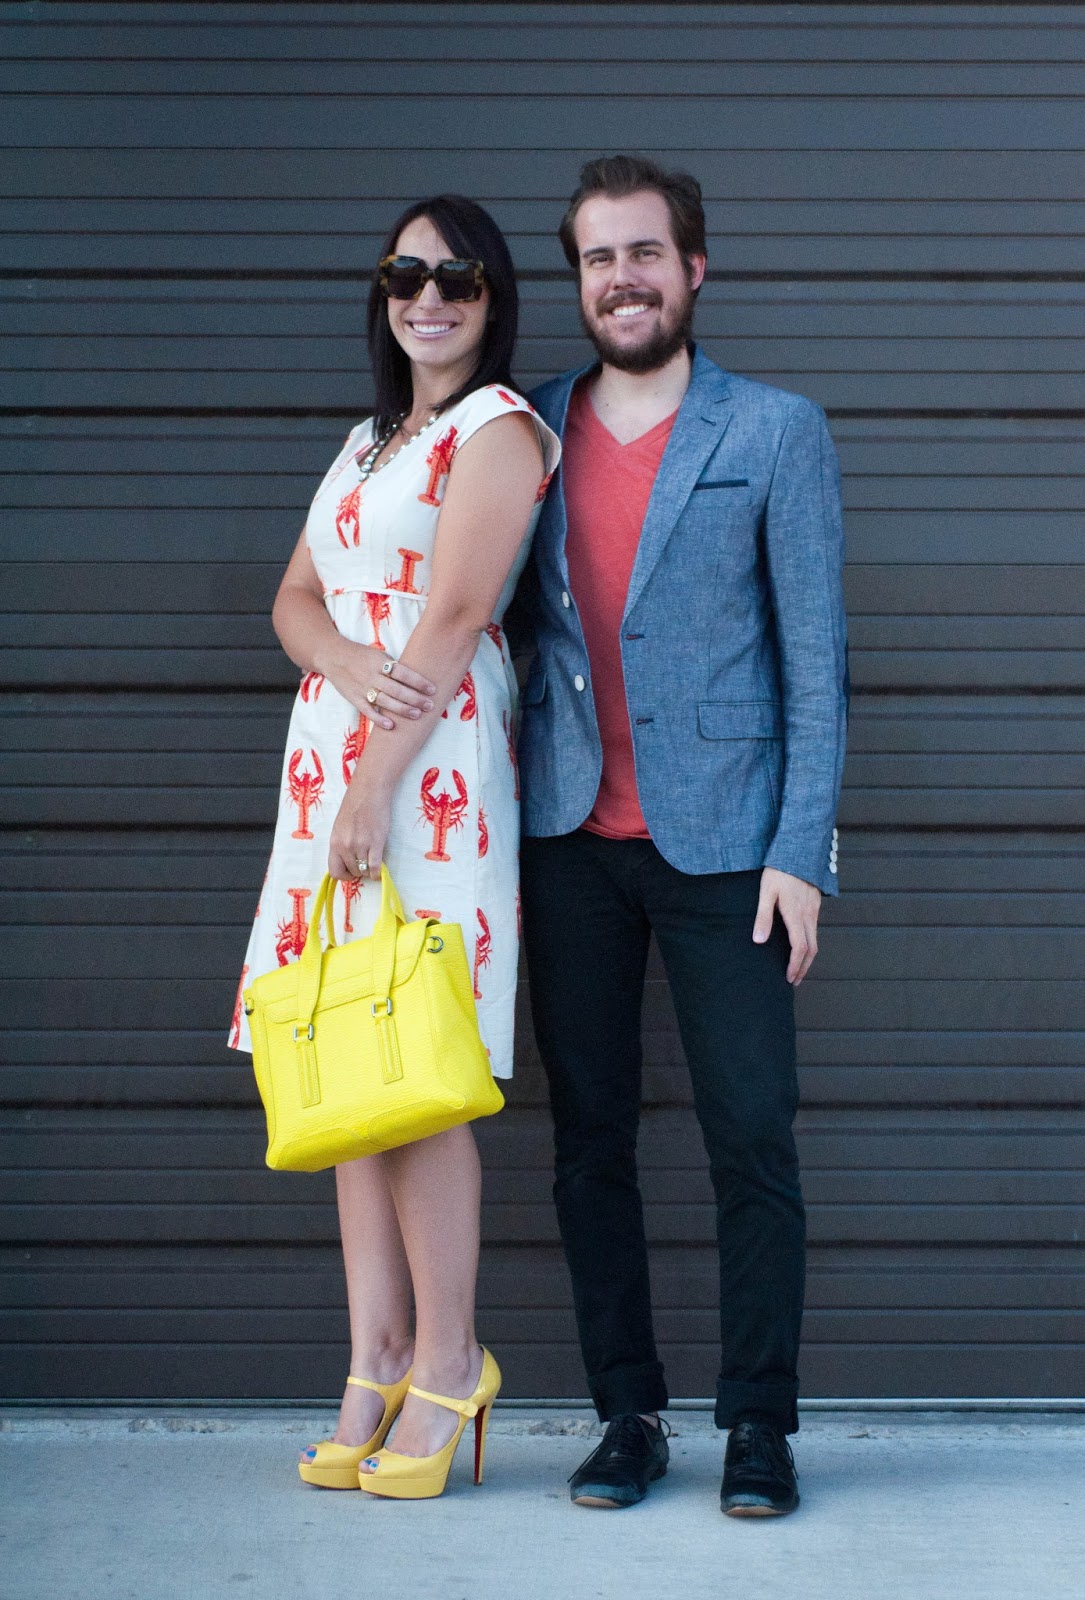 couples fashion, couples style, lobster dress, christian louboutin, red soles, zara man